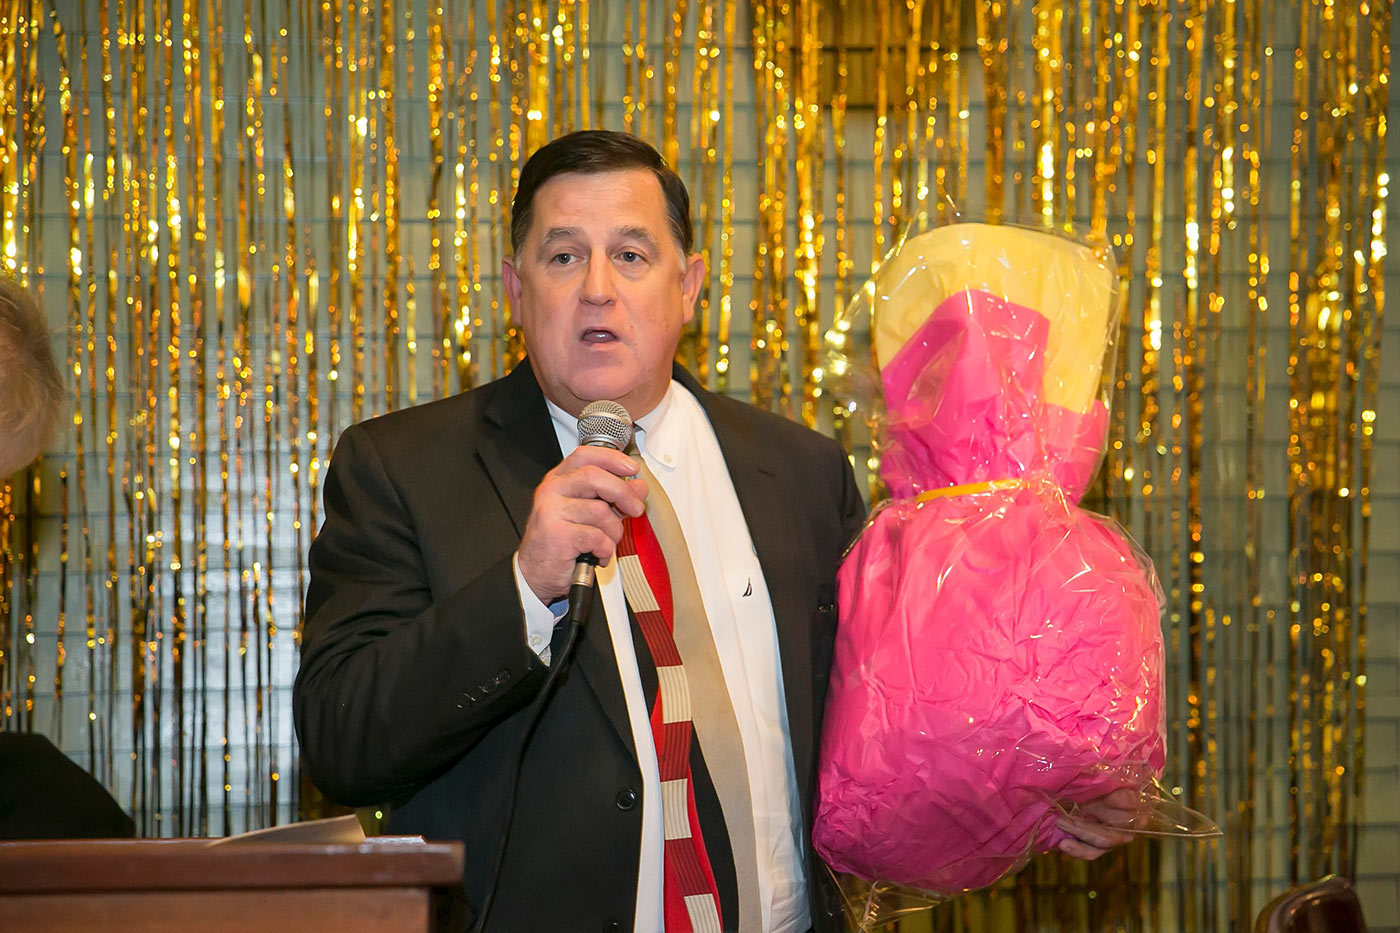 man in suit speaking on microphone with pink basket